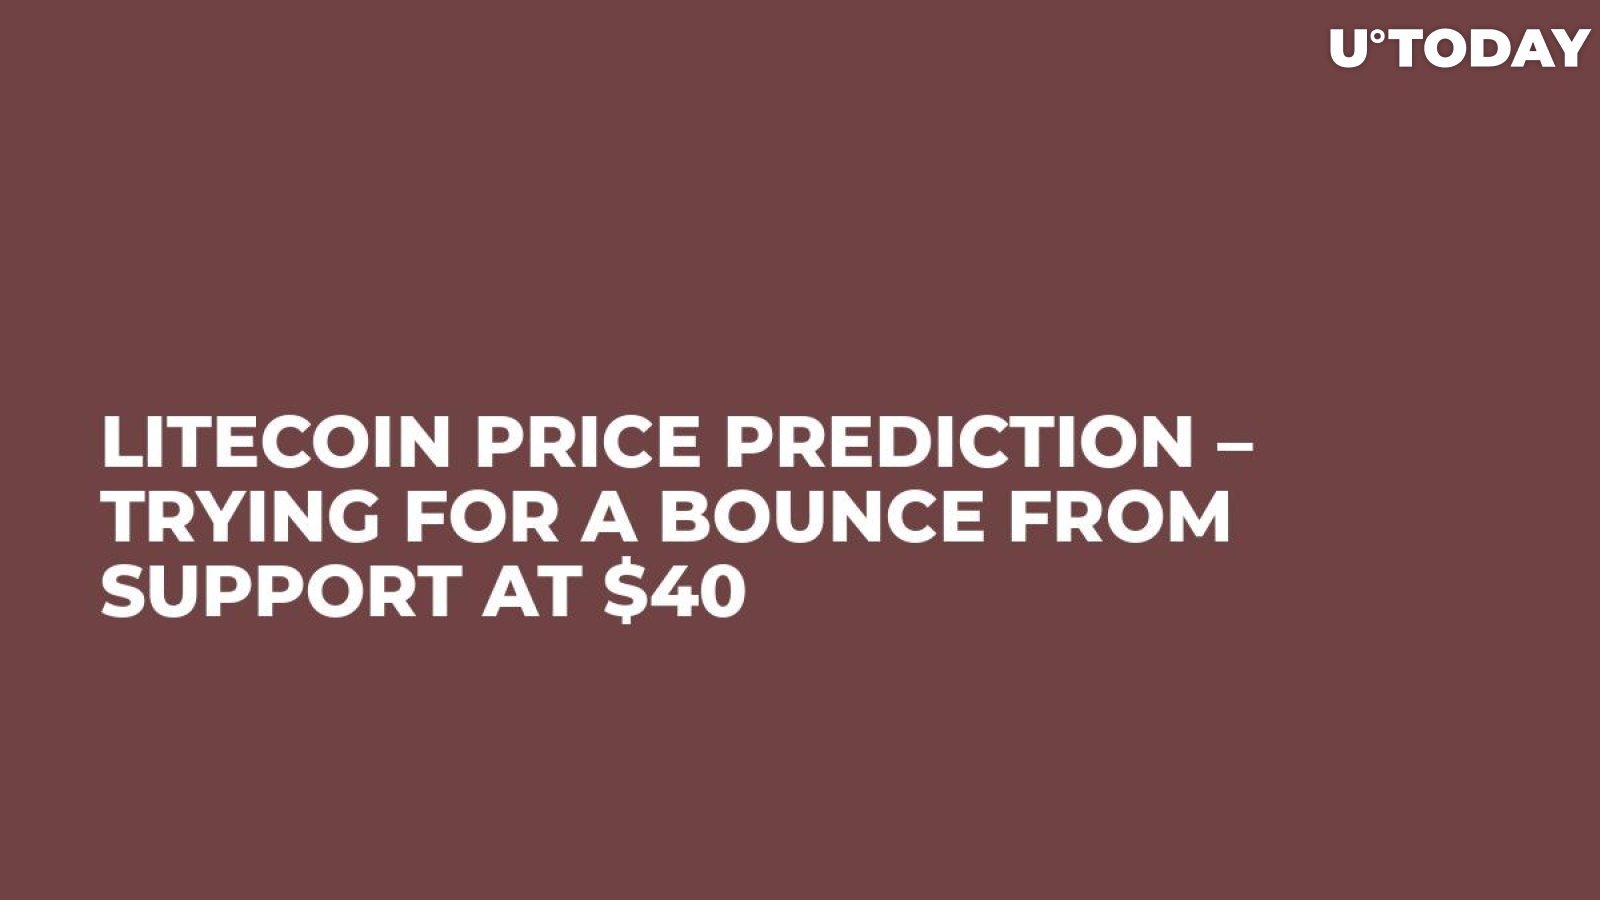 Litecoin Price Prediction – Trying for a Bounce from Support at $40